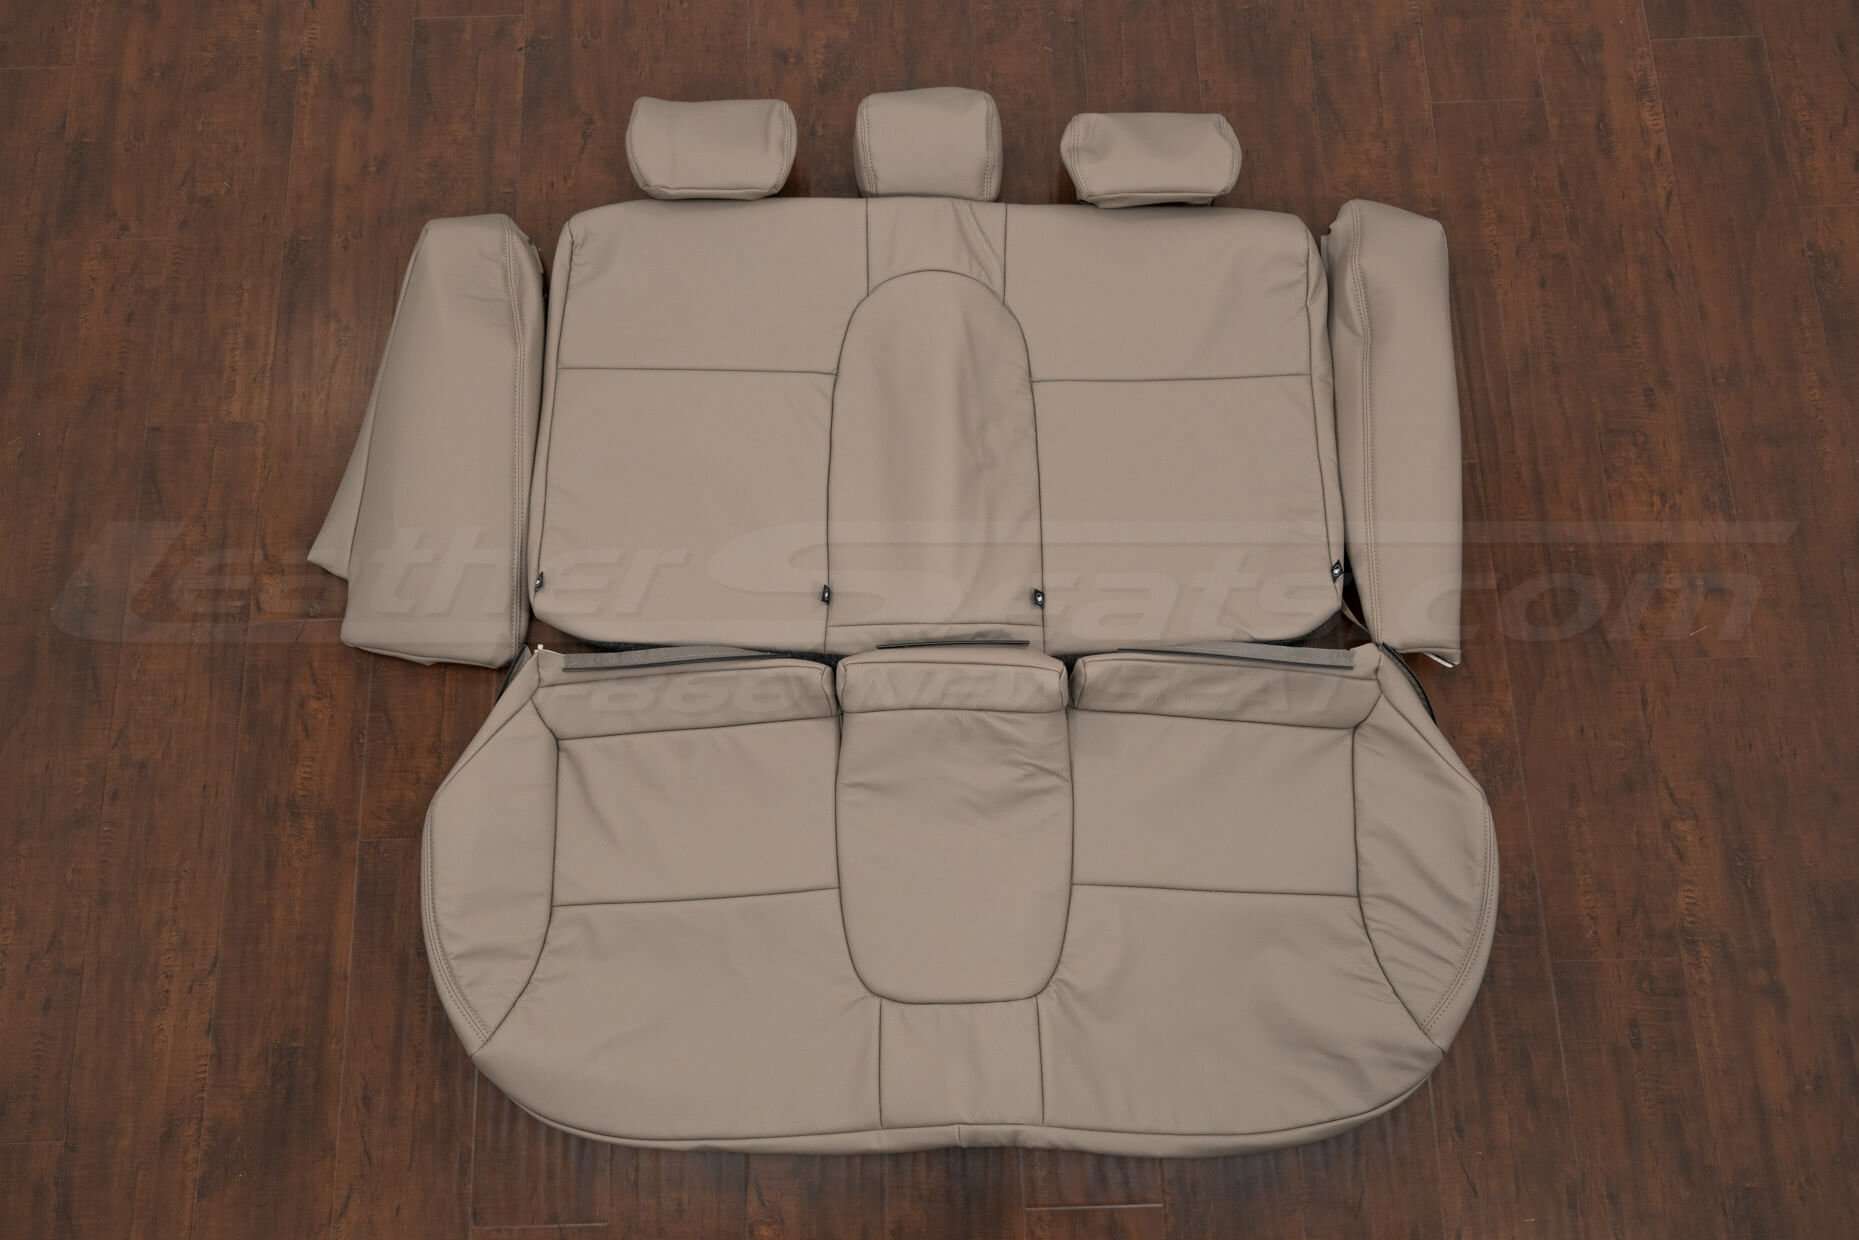 Honda Civic Sedan Leather Seat Kit - Fawn - Rear seat upholstery with Bolsters